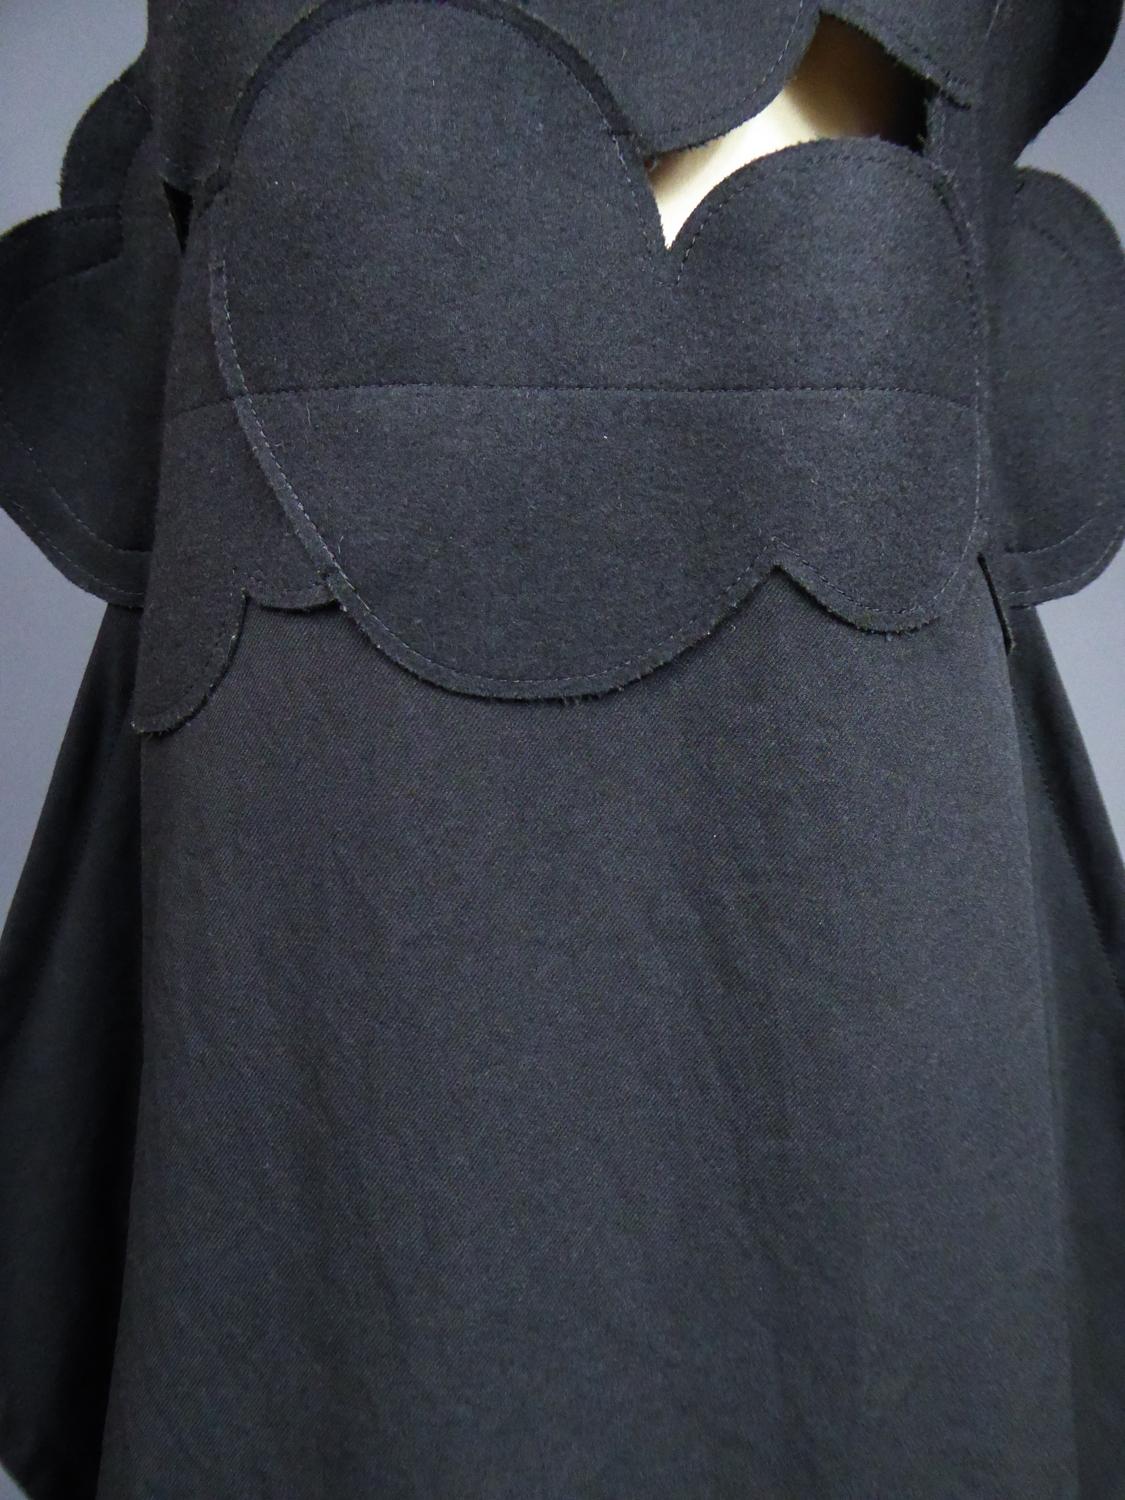 A Comme des Garcons Junya Watanabe Black Woollen Chasuble Dress Circa 2000 For Sale 3